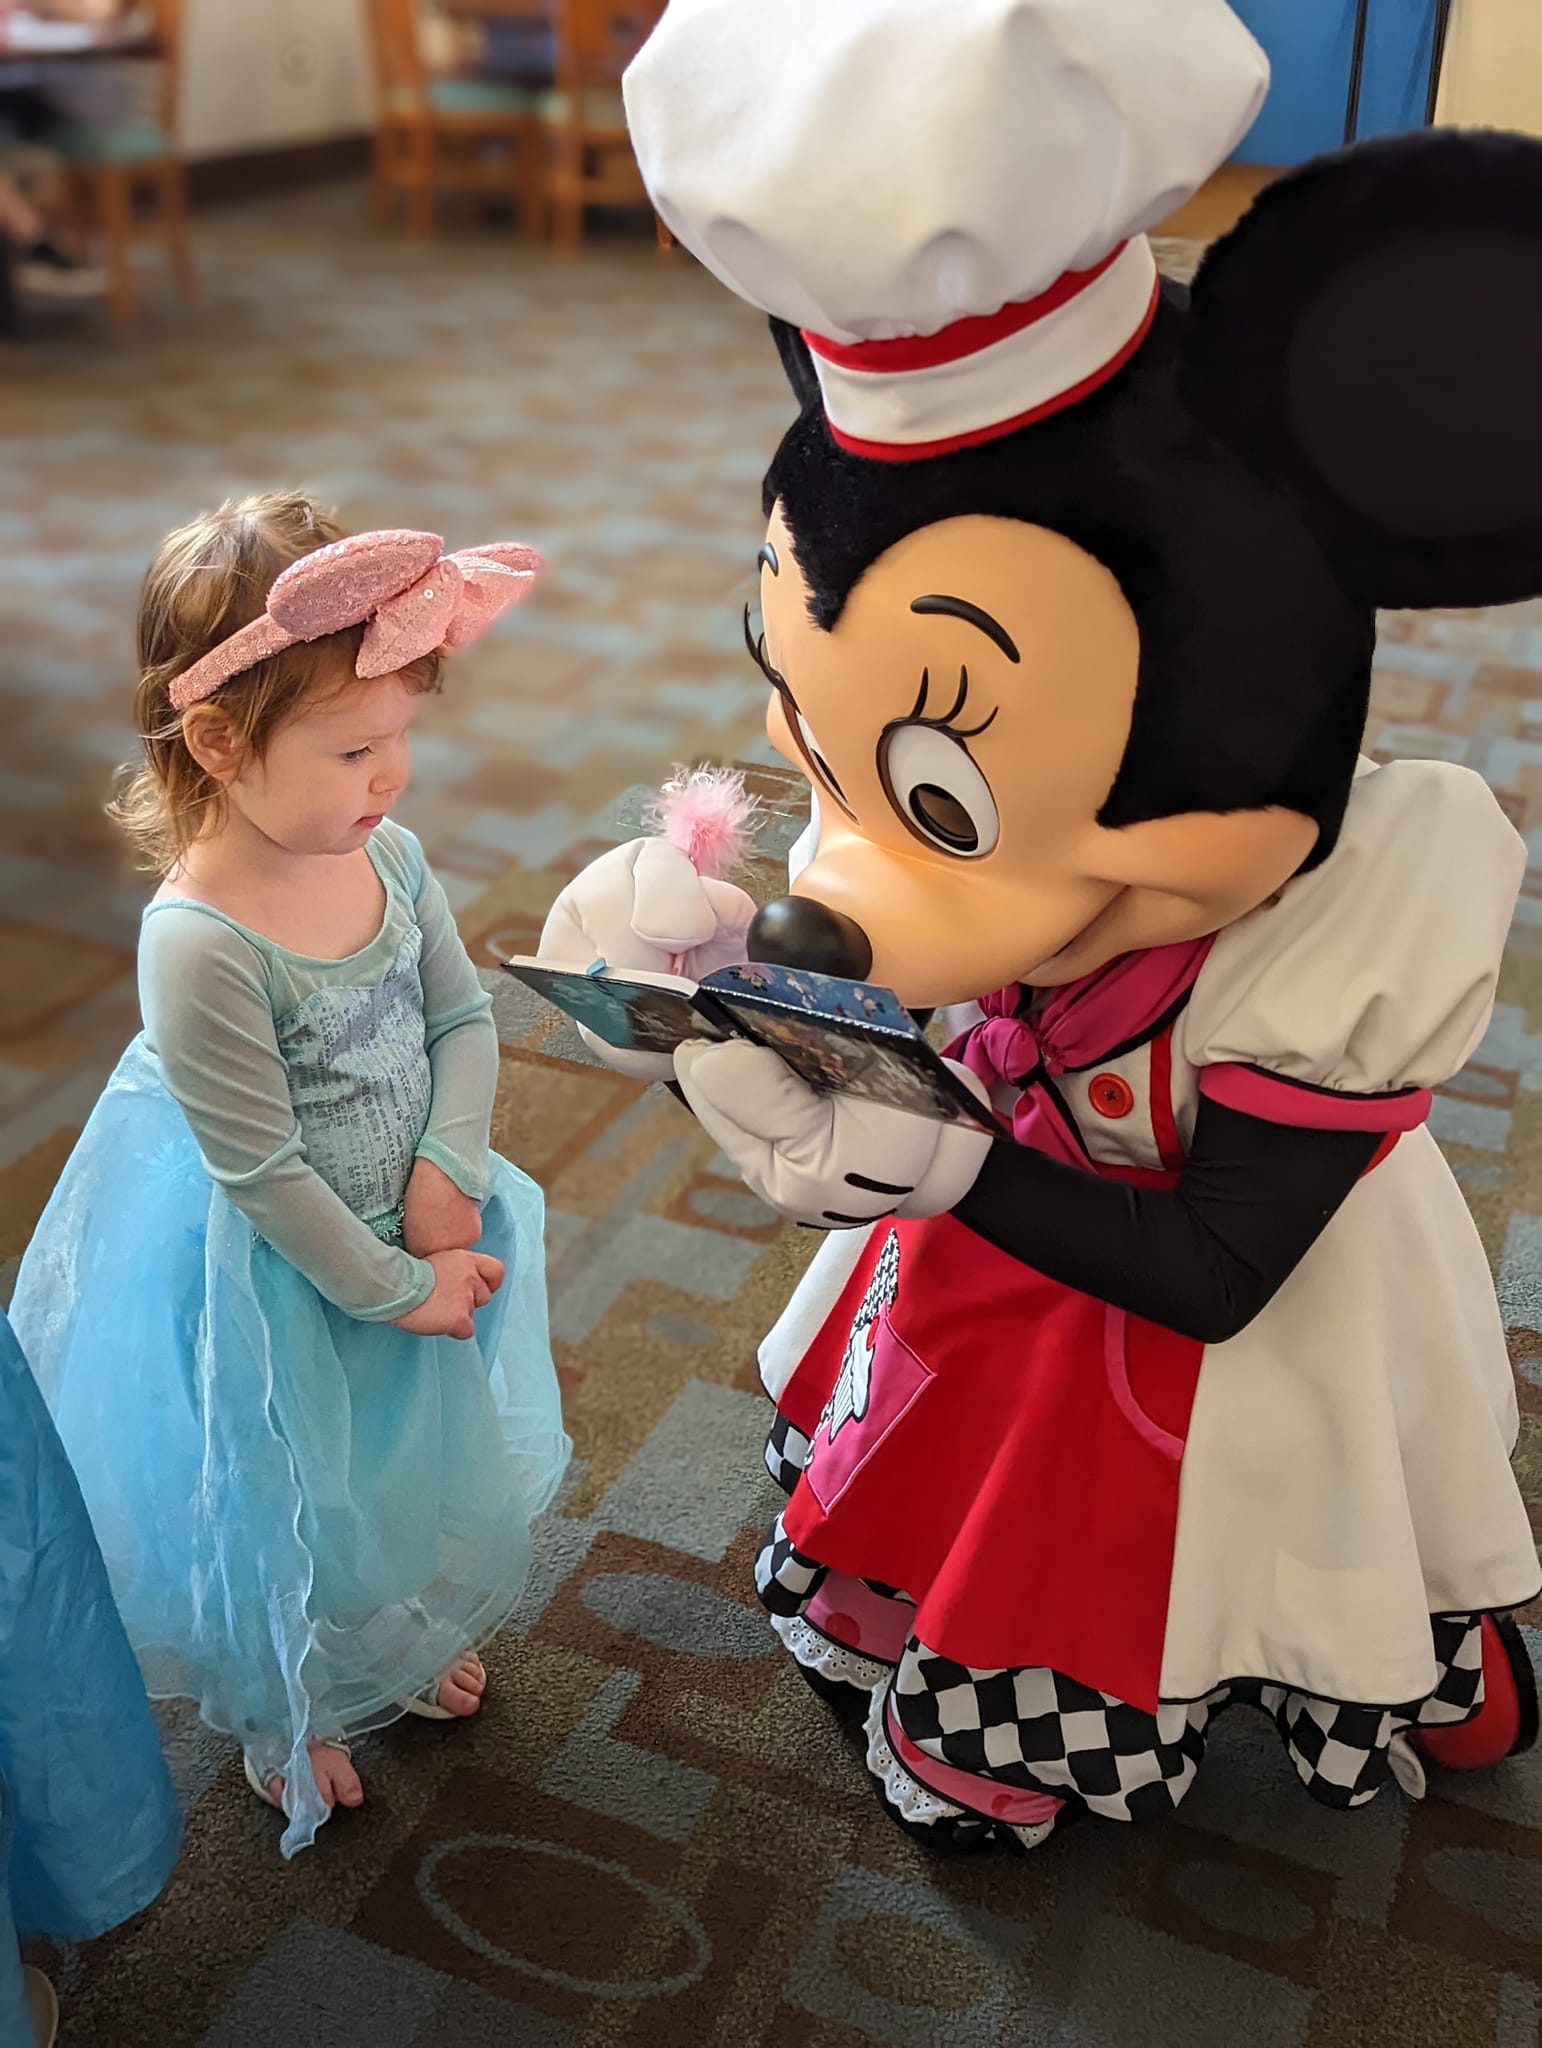 Glaser's daughter meets Minnie Mouse